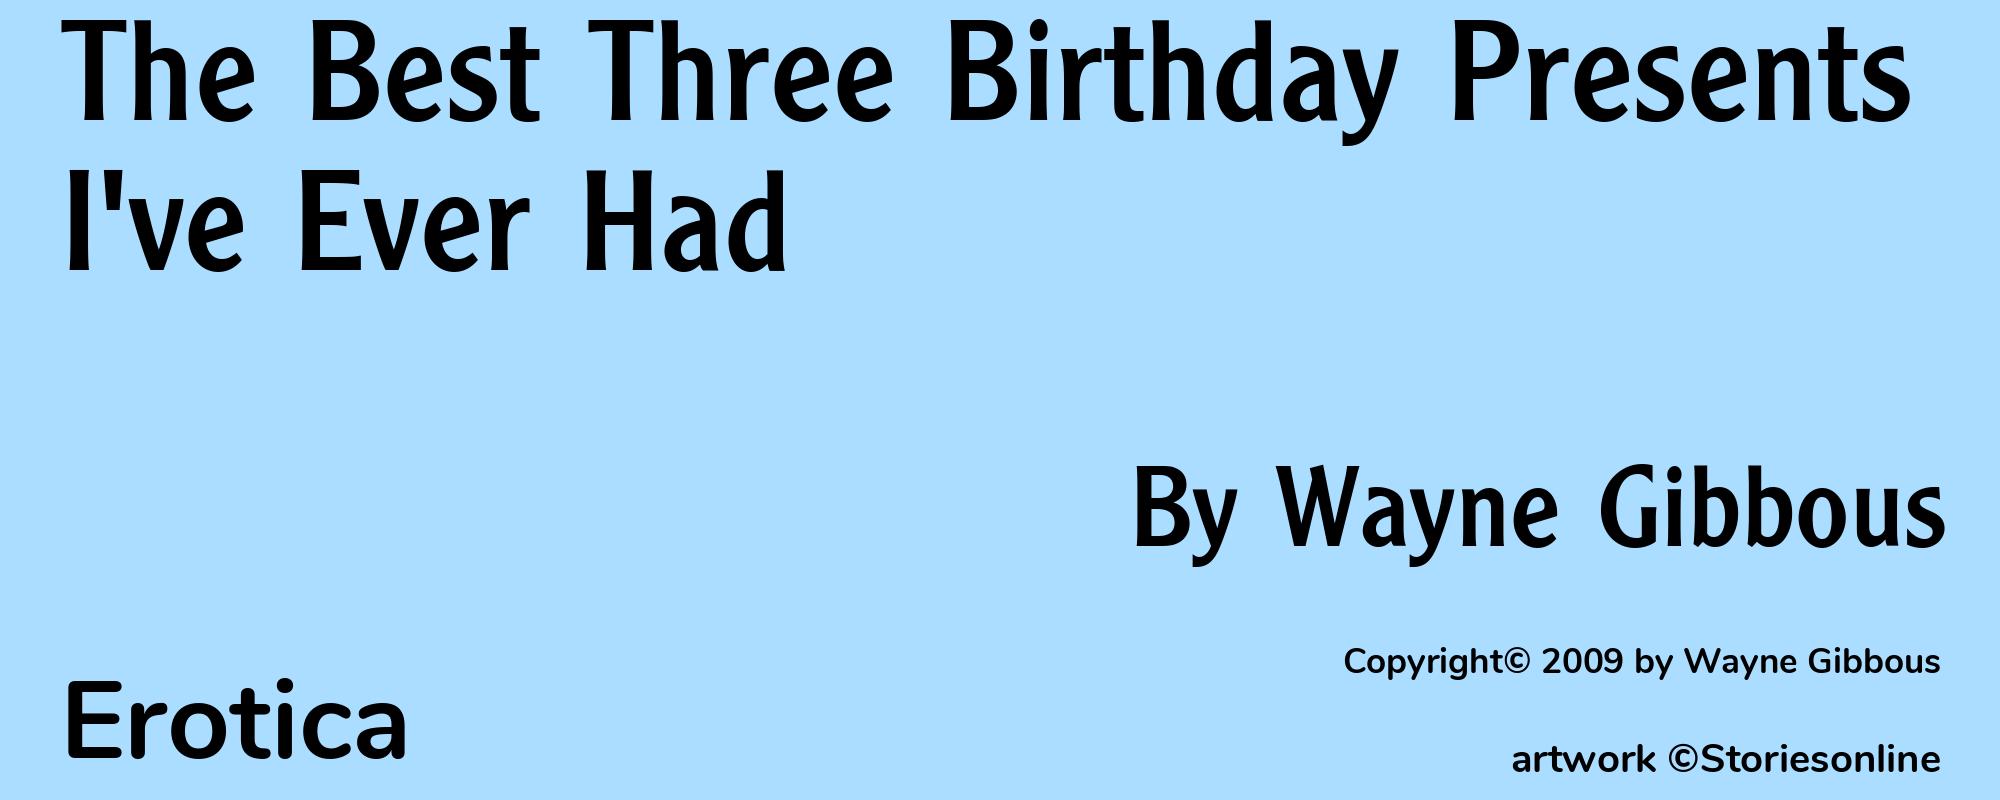 The Best Three Birthday Presents I've Ever Had - Cover